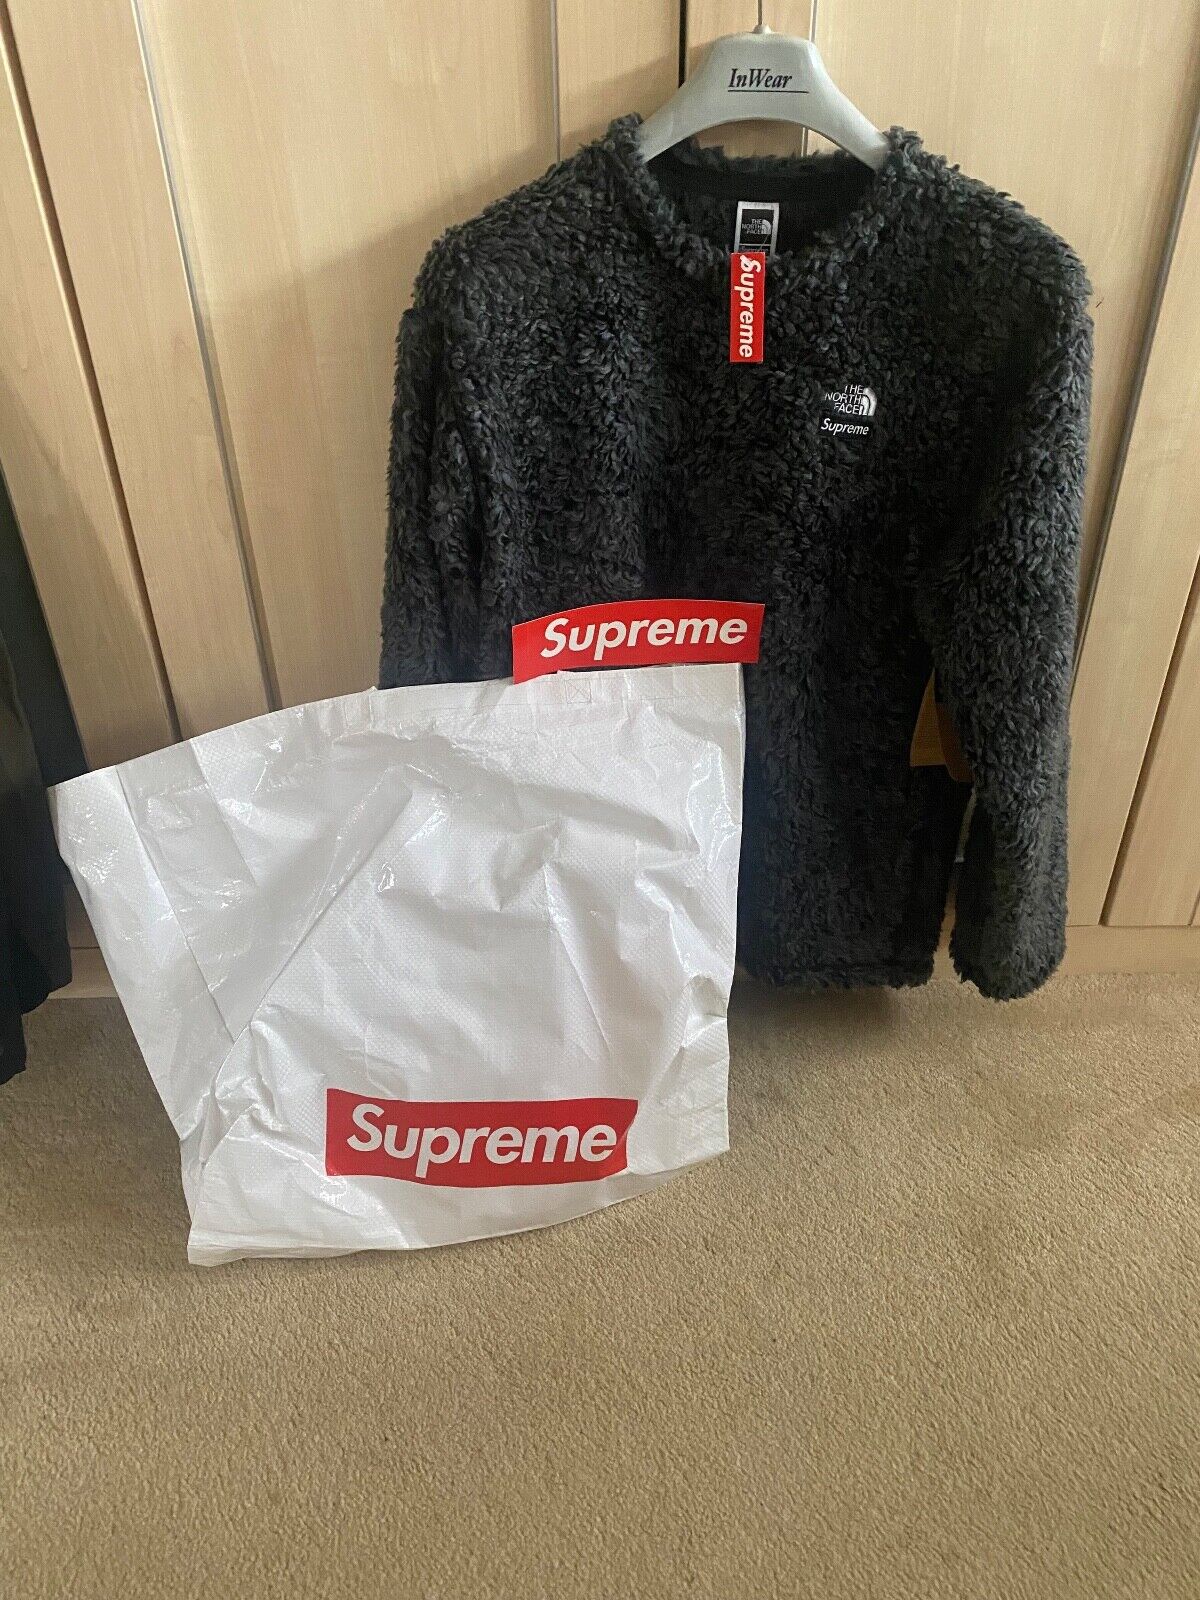 Supreme x The North Face High Pile Fleece Pullover Size Small with Bag